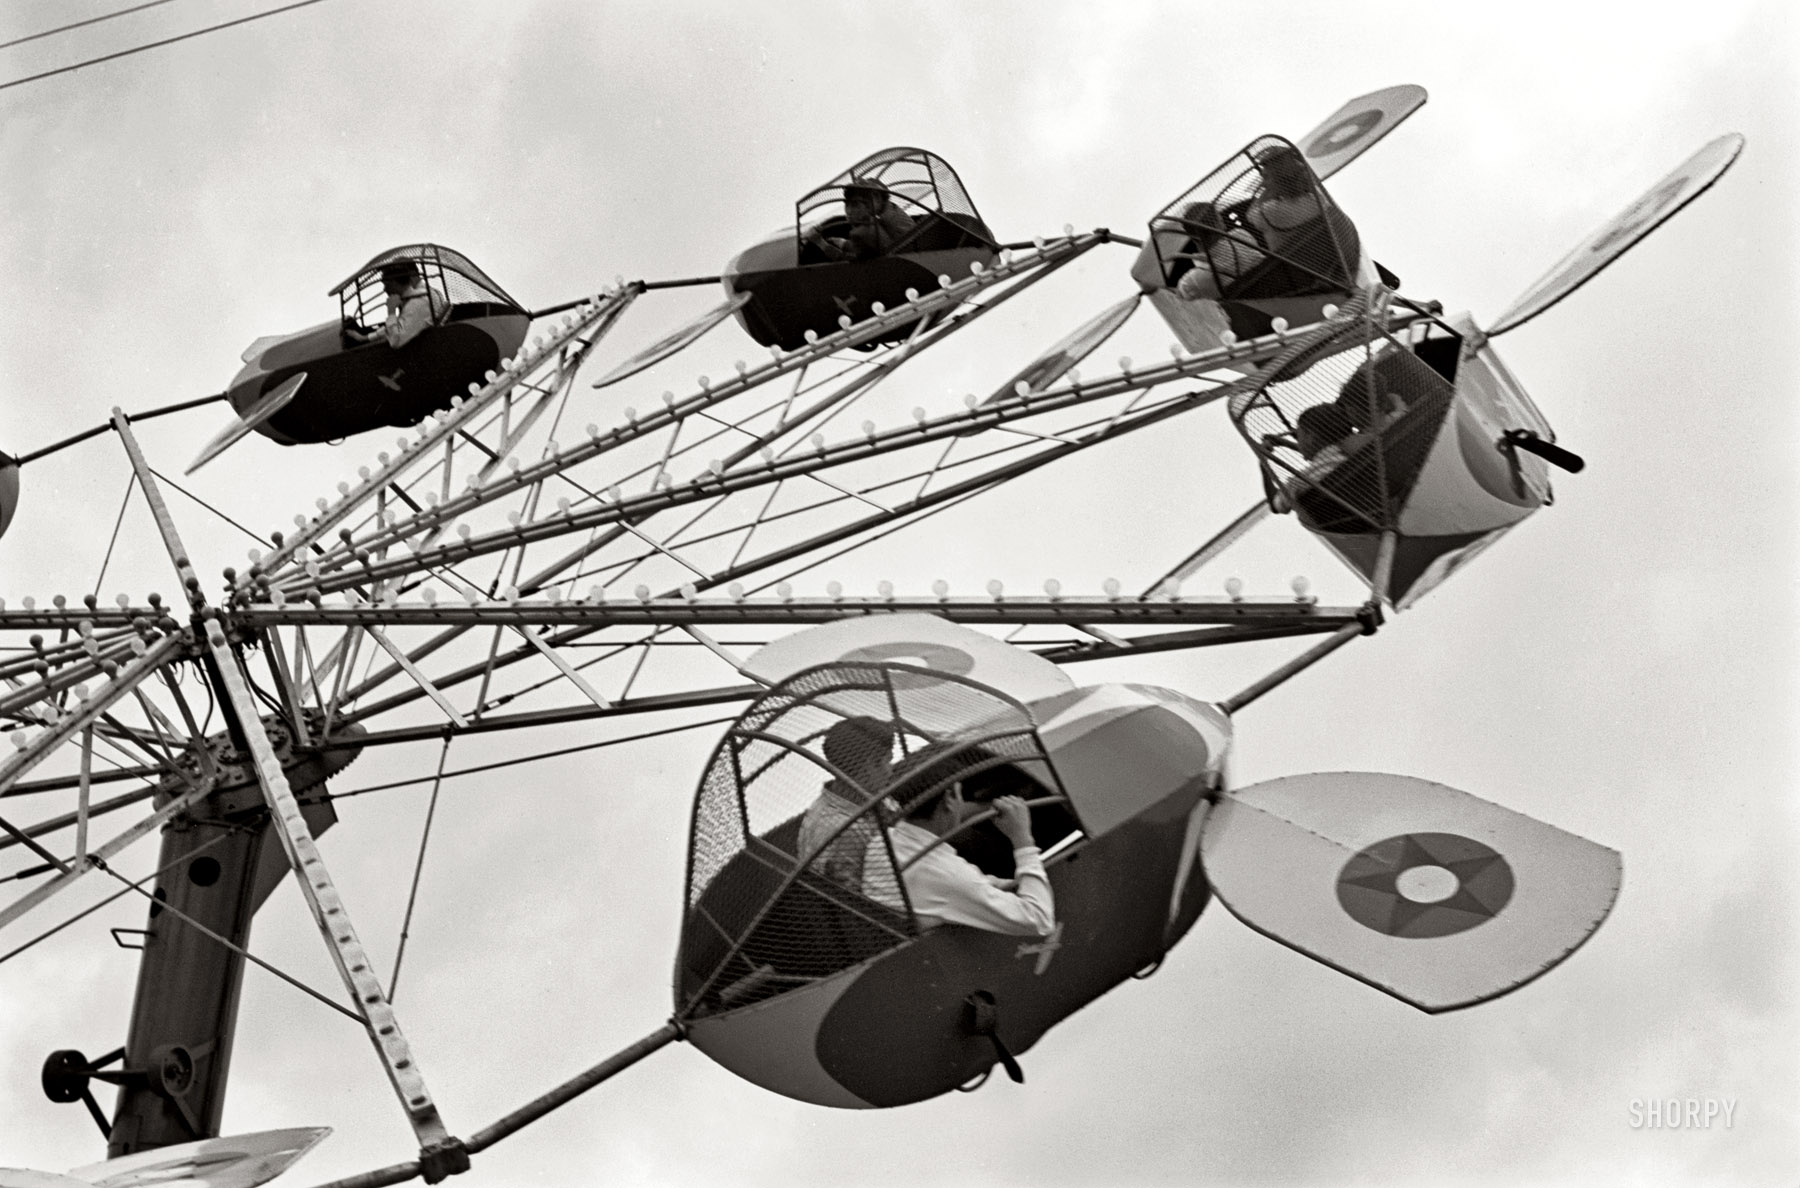 February 1942. "Brownsville, Texas. Carnival ride." 35mm nitrate negative by Arthur Rothstein for the Farm Security Administration. View full size. 